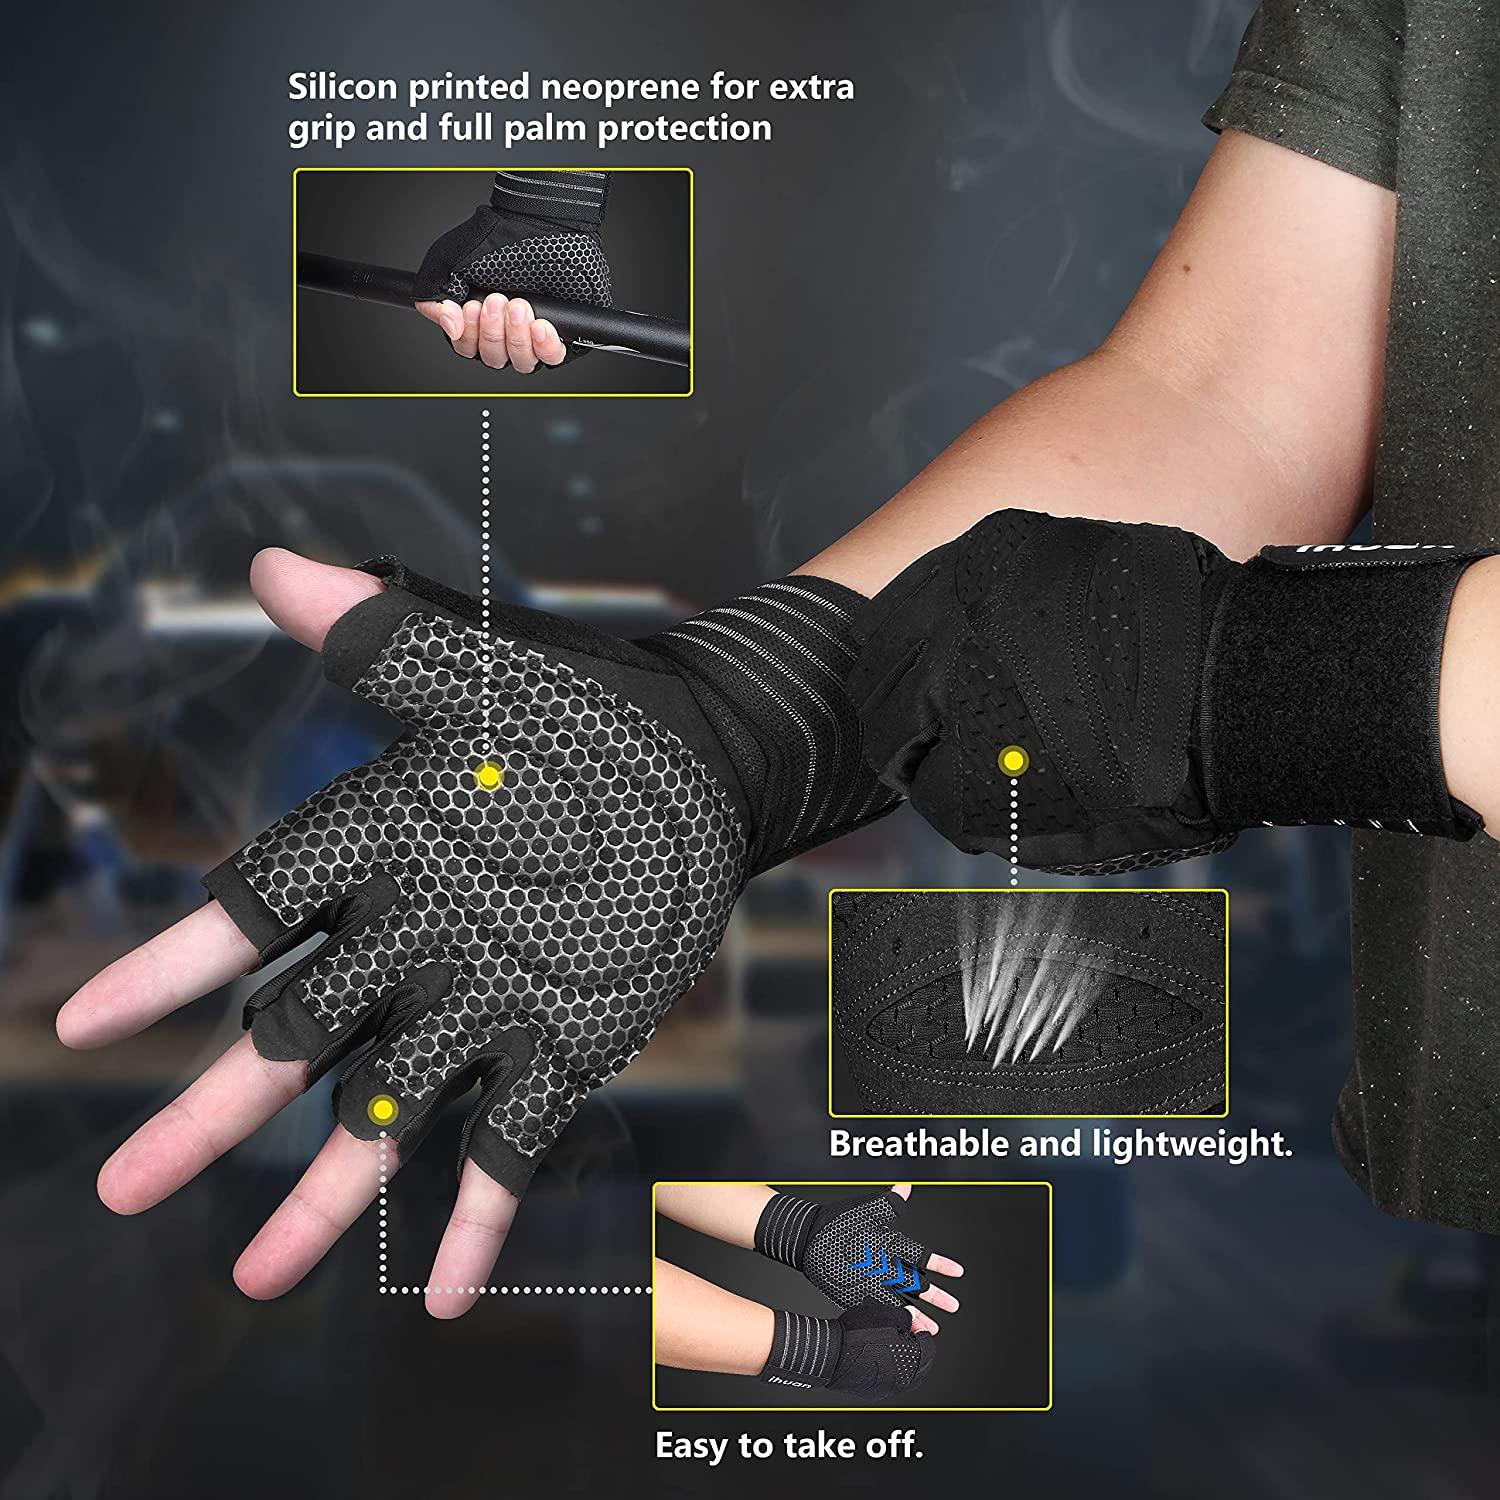 New Ventilated Weight Lifting Gloves With Built-in Wrist Wraps, Full Palm  Protection & Extra Grip. Great For Pull Ups, Cross Training, Fitness,  Weight